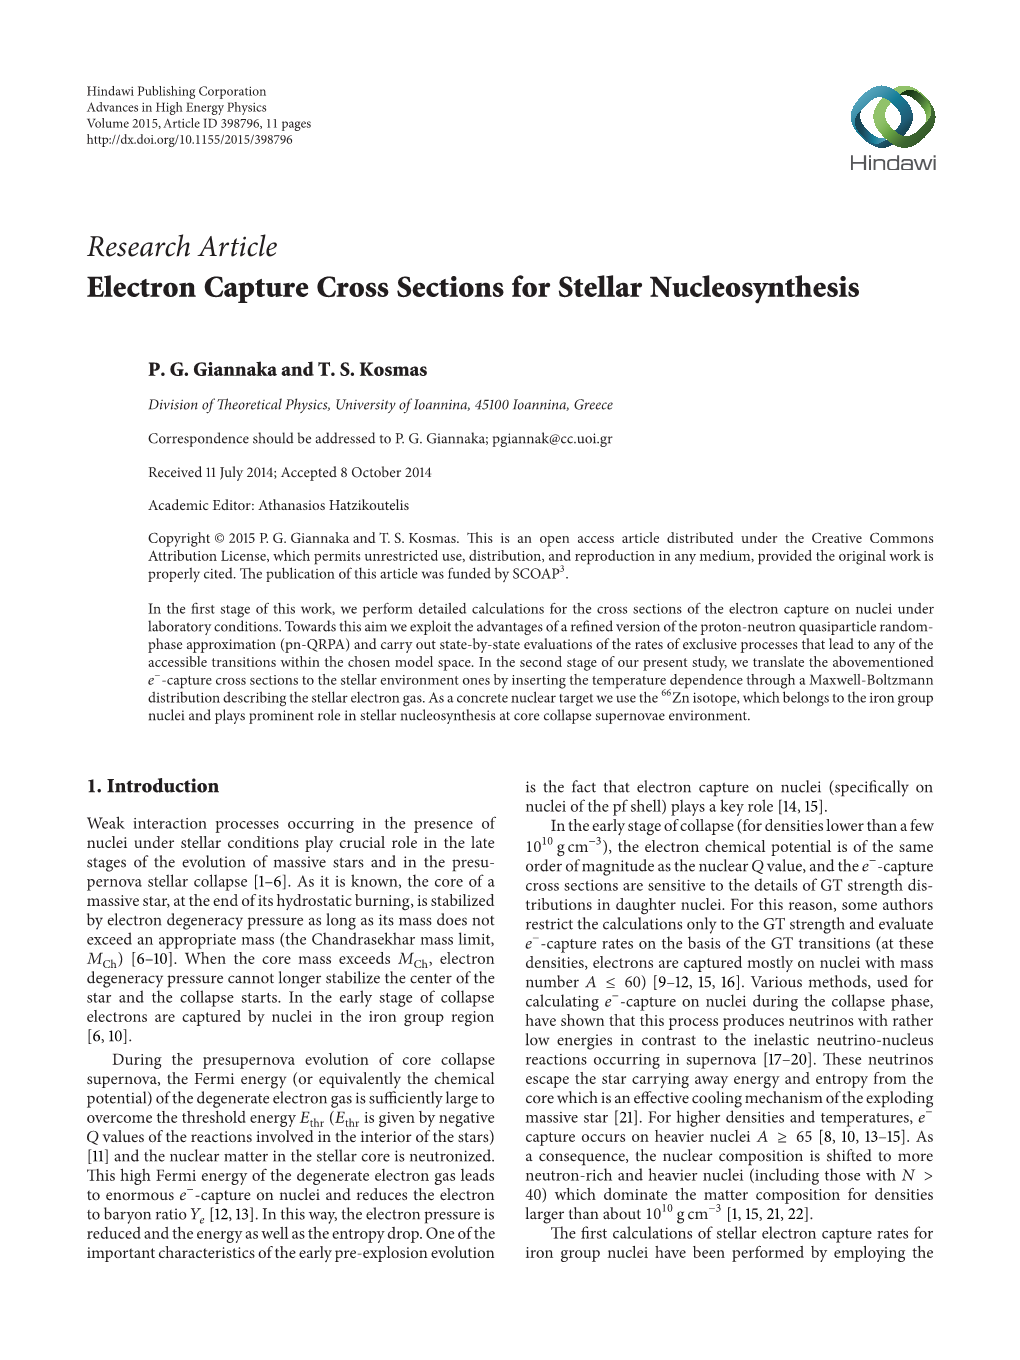 Research Article Electron Capture Cross Sections for Stellar Nucleosynthesis